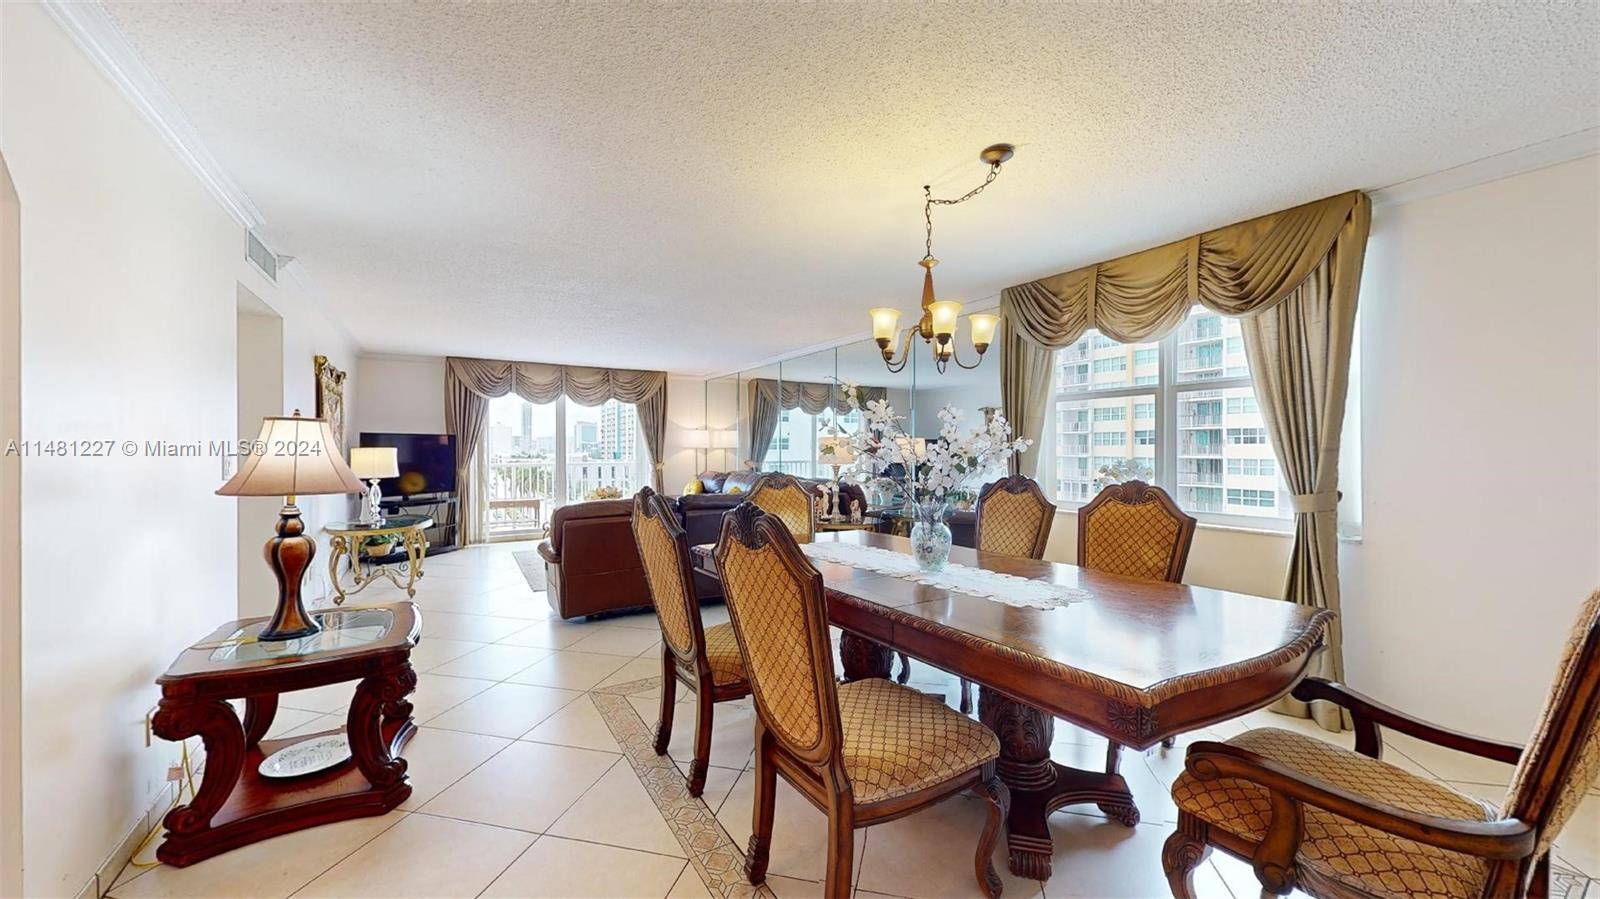 WELCOME TO CAMBRIDGE TOWERS CONDO, GREAT CORNER UNIT 2 2 WITH BREATH TAKING VIEWS OF THE OCEA TO THE EAST, INTRACOASTAL ON THE WEST, CITY VIEWS SOUTH AND NORTH.